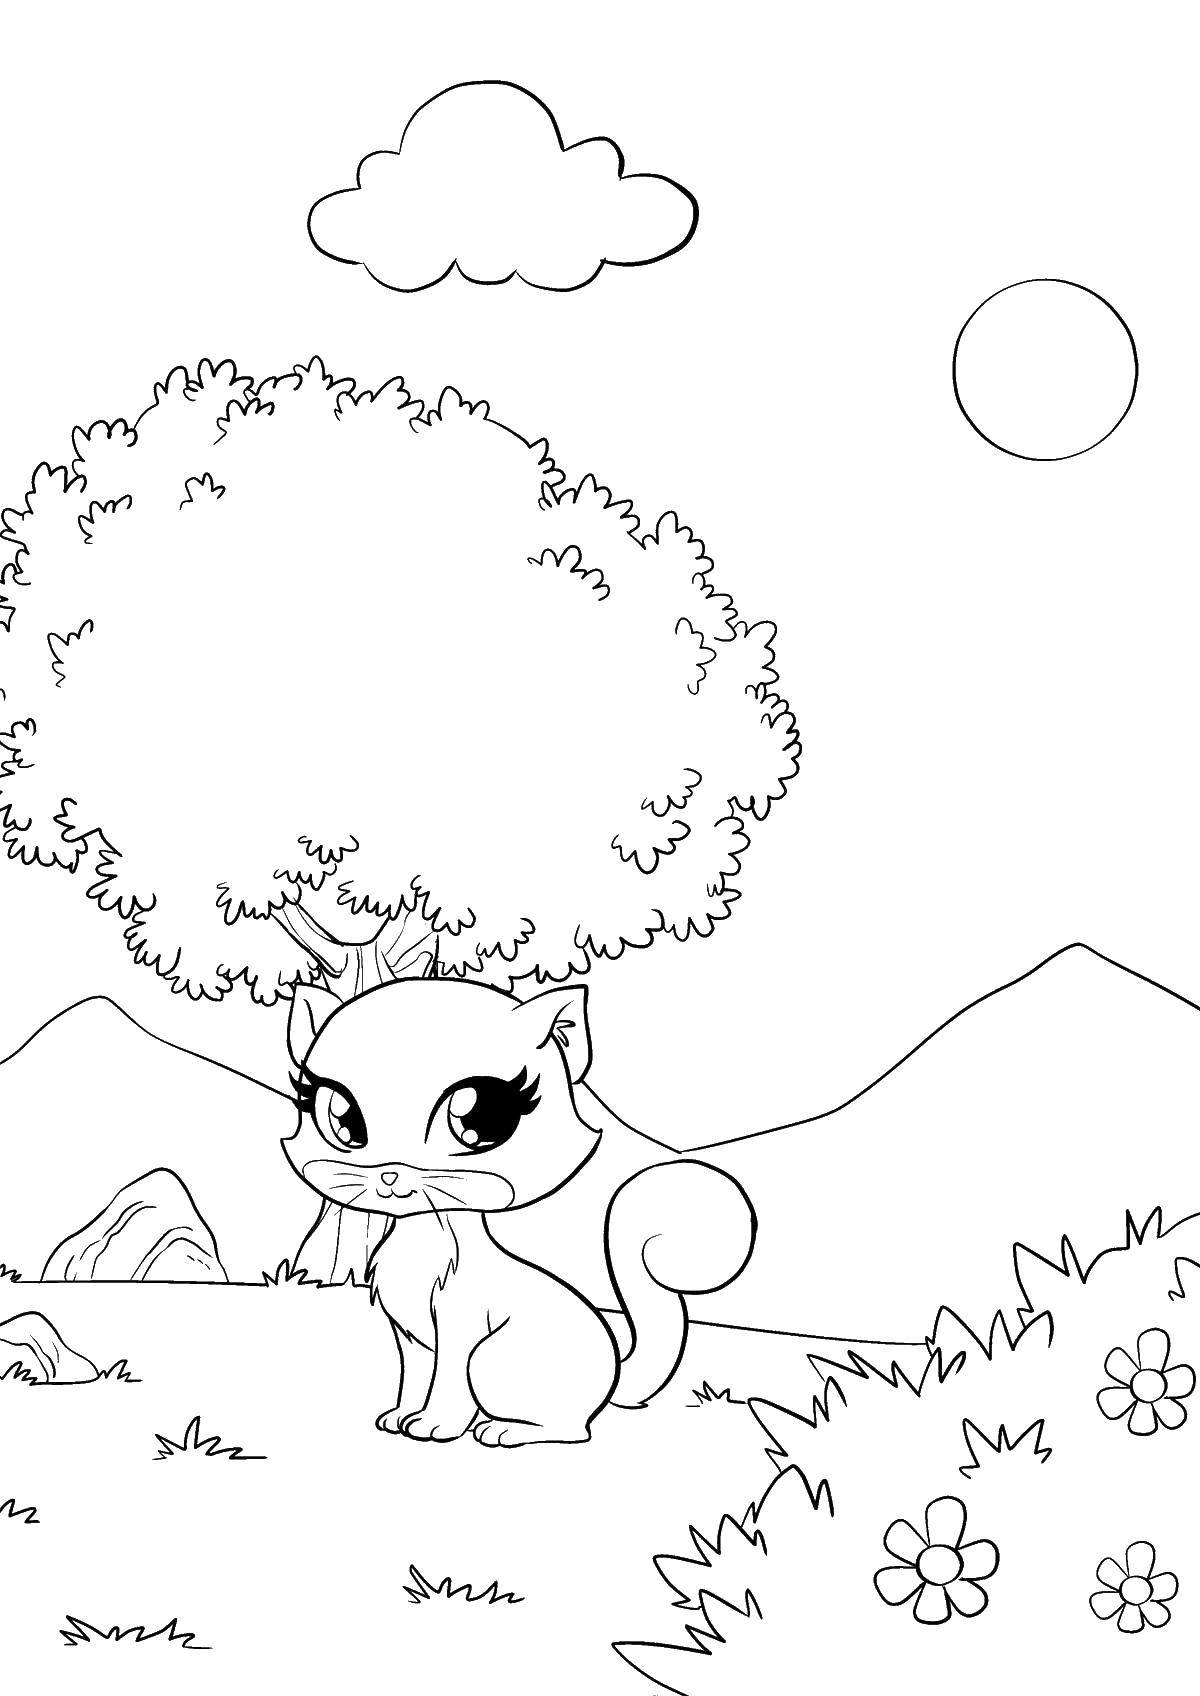 Coloring Kitty and tree. Category kittens. Tags:  kitten, tree, flowers.